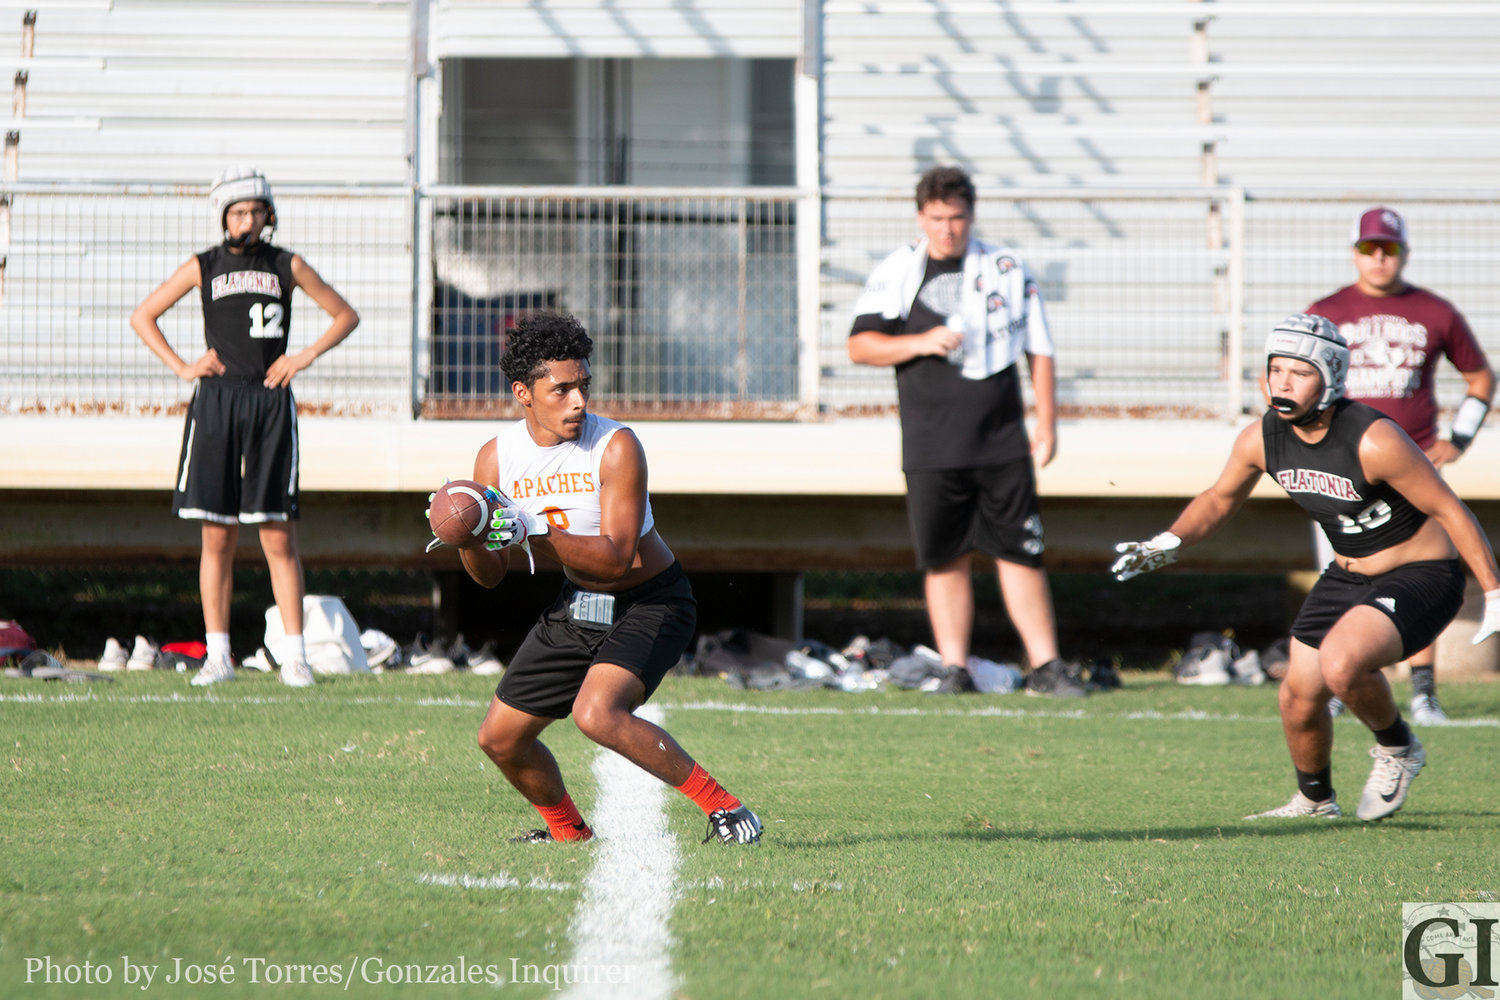 The Gonzales Apaches hosted a 7-on-7 football event at Apache Field on Tuesday, competing against Luling and Flatonia during the exhibition. The athletes have competed all summer long in 7-on-7 competitions in hopes of getting the timing right between quarterbacks and their receivers.